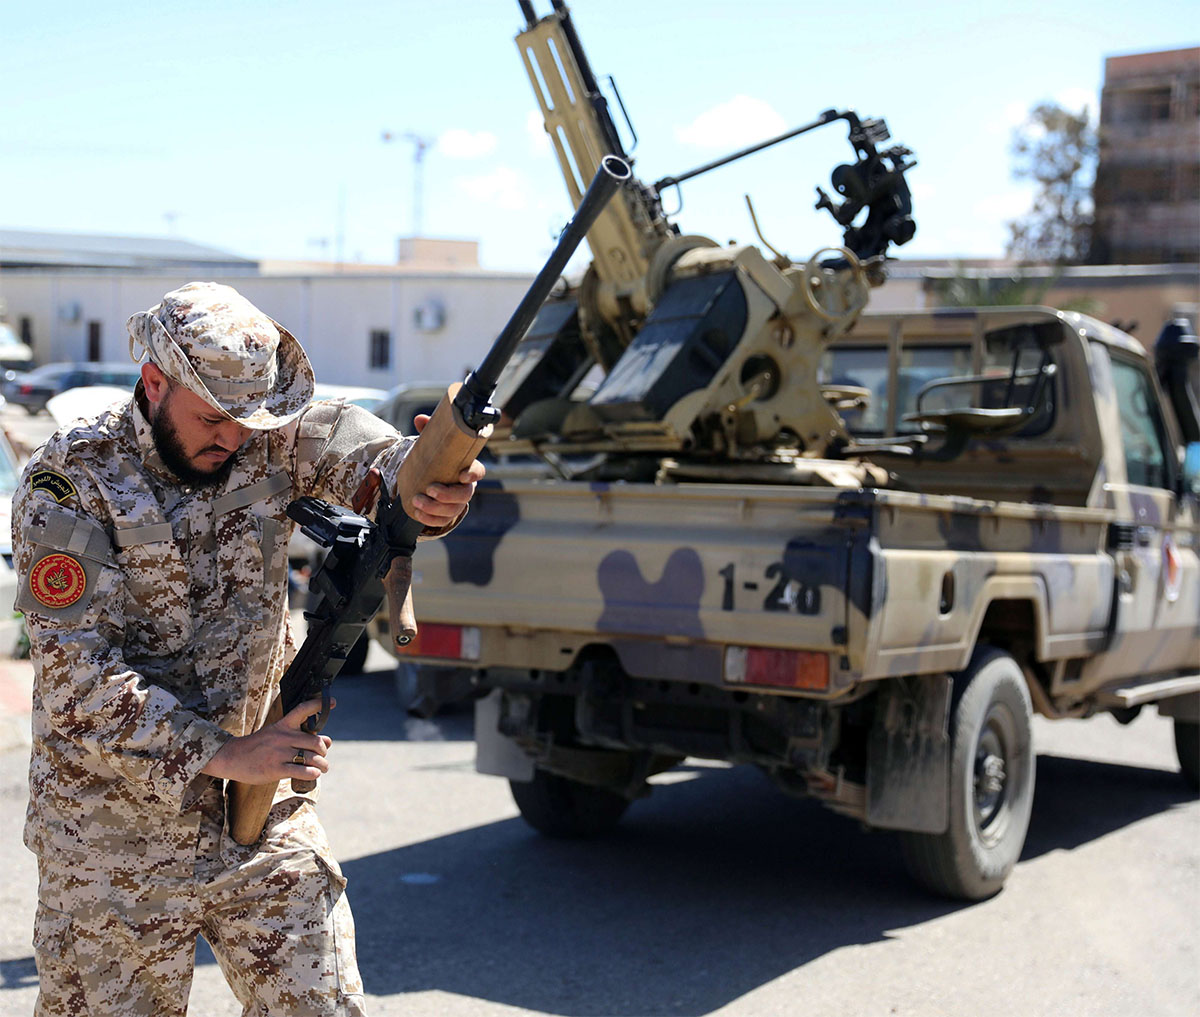 A Member of Misrata forces prepares himself to go to the front line in Tripoli